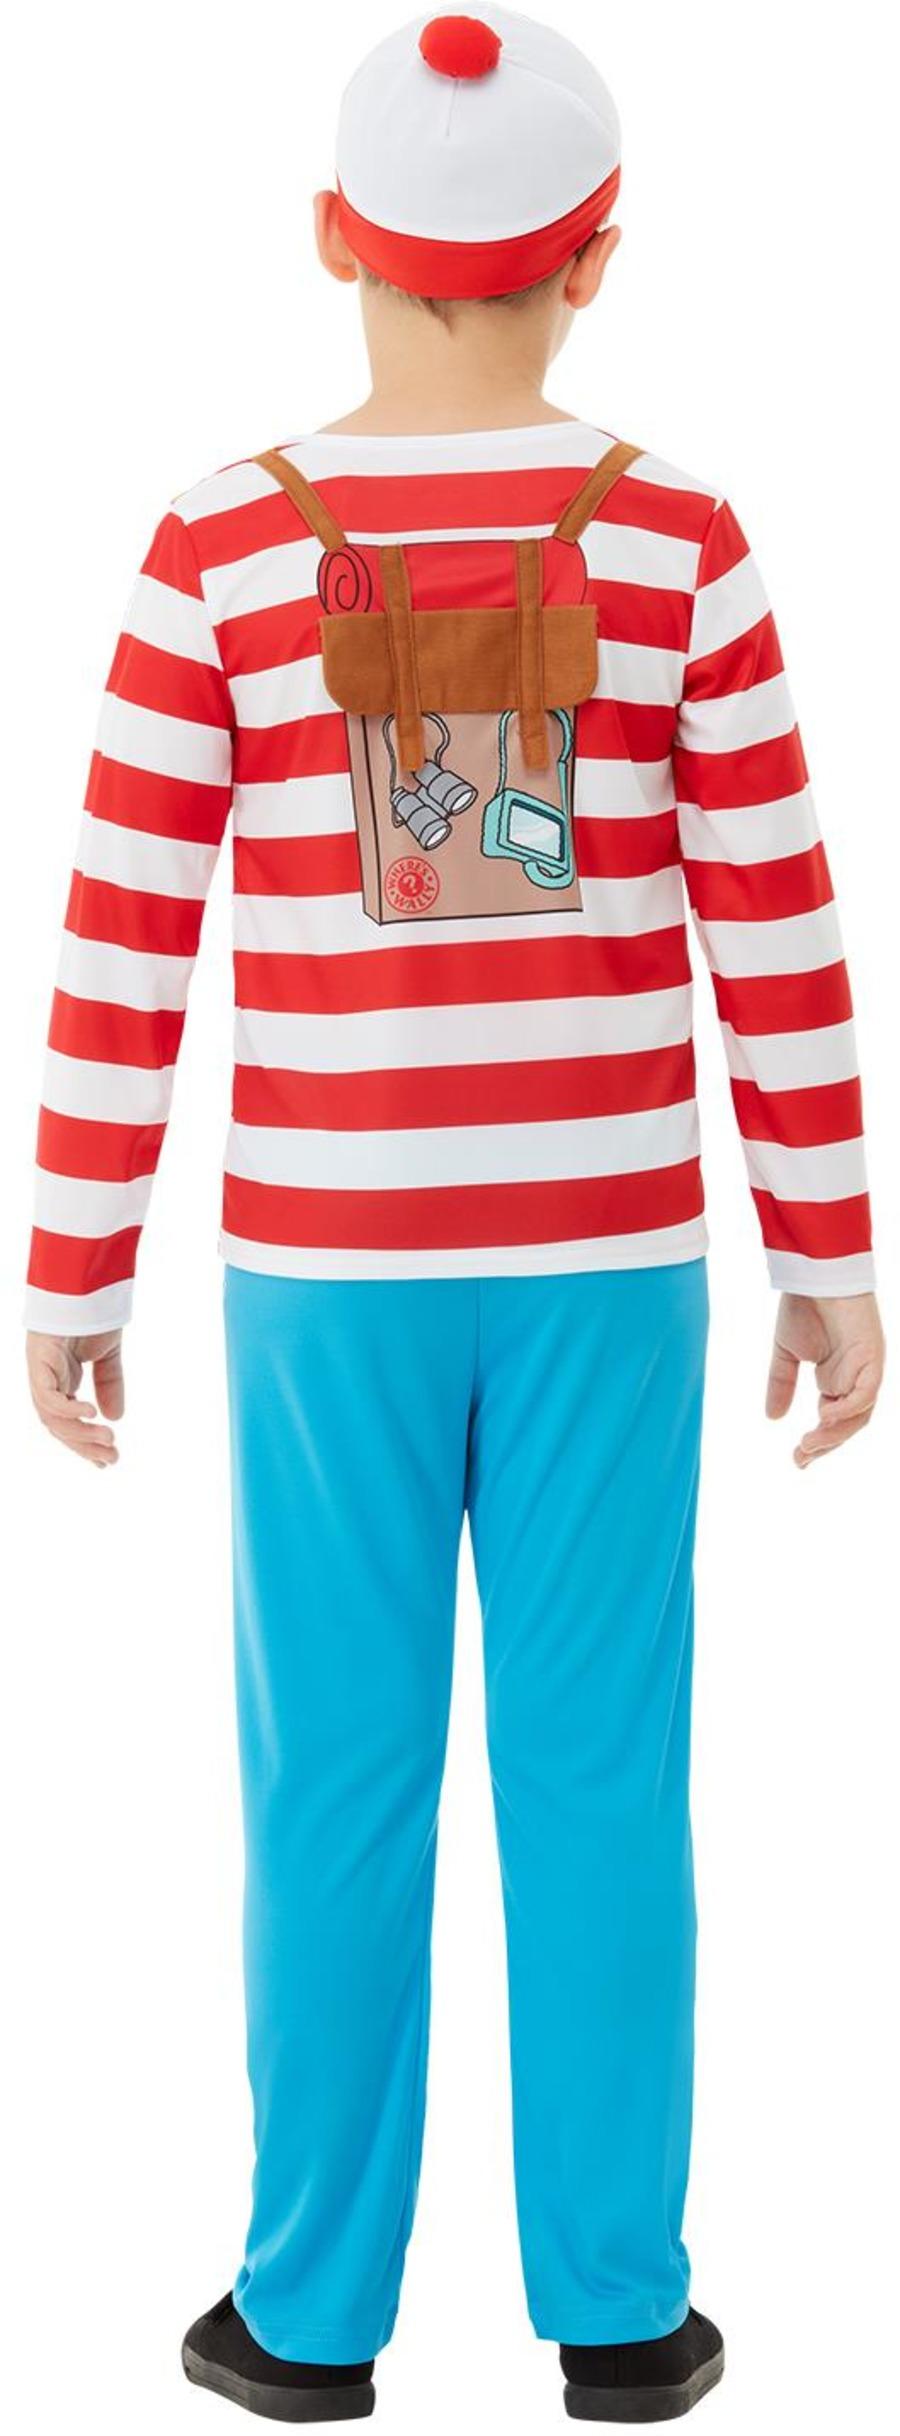 Kids Deluxe Where's Wally Costume